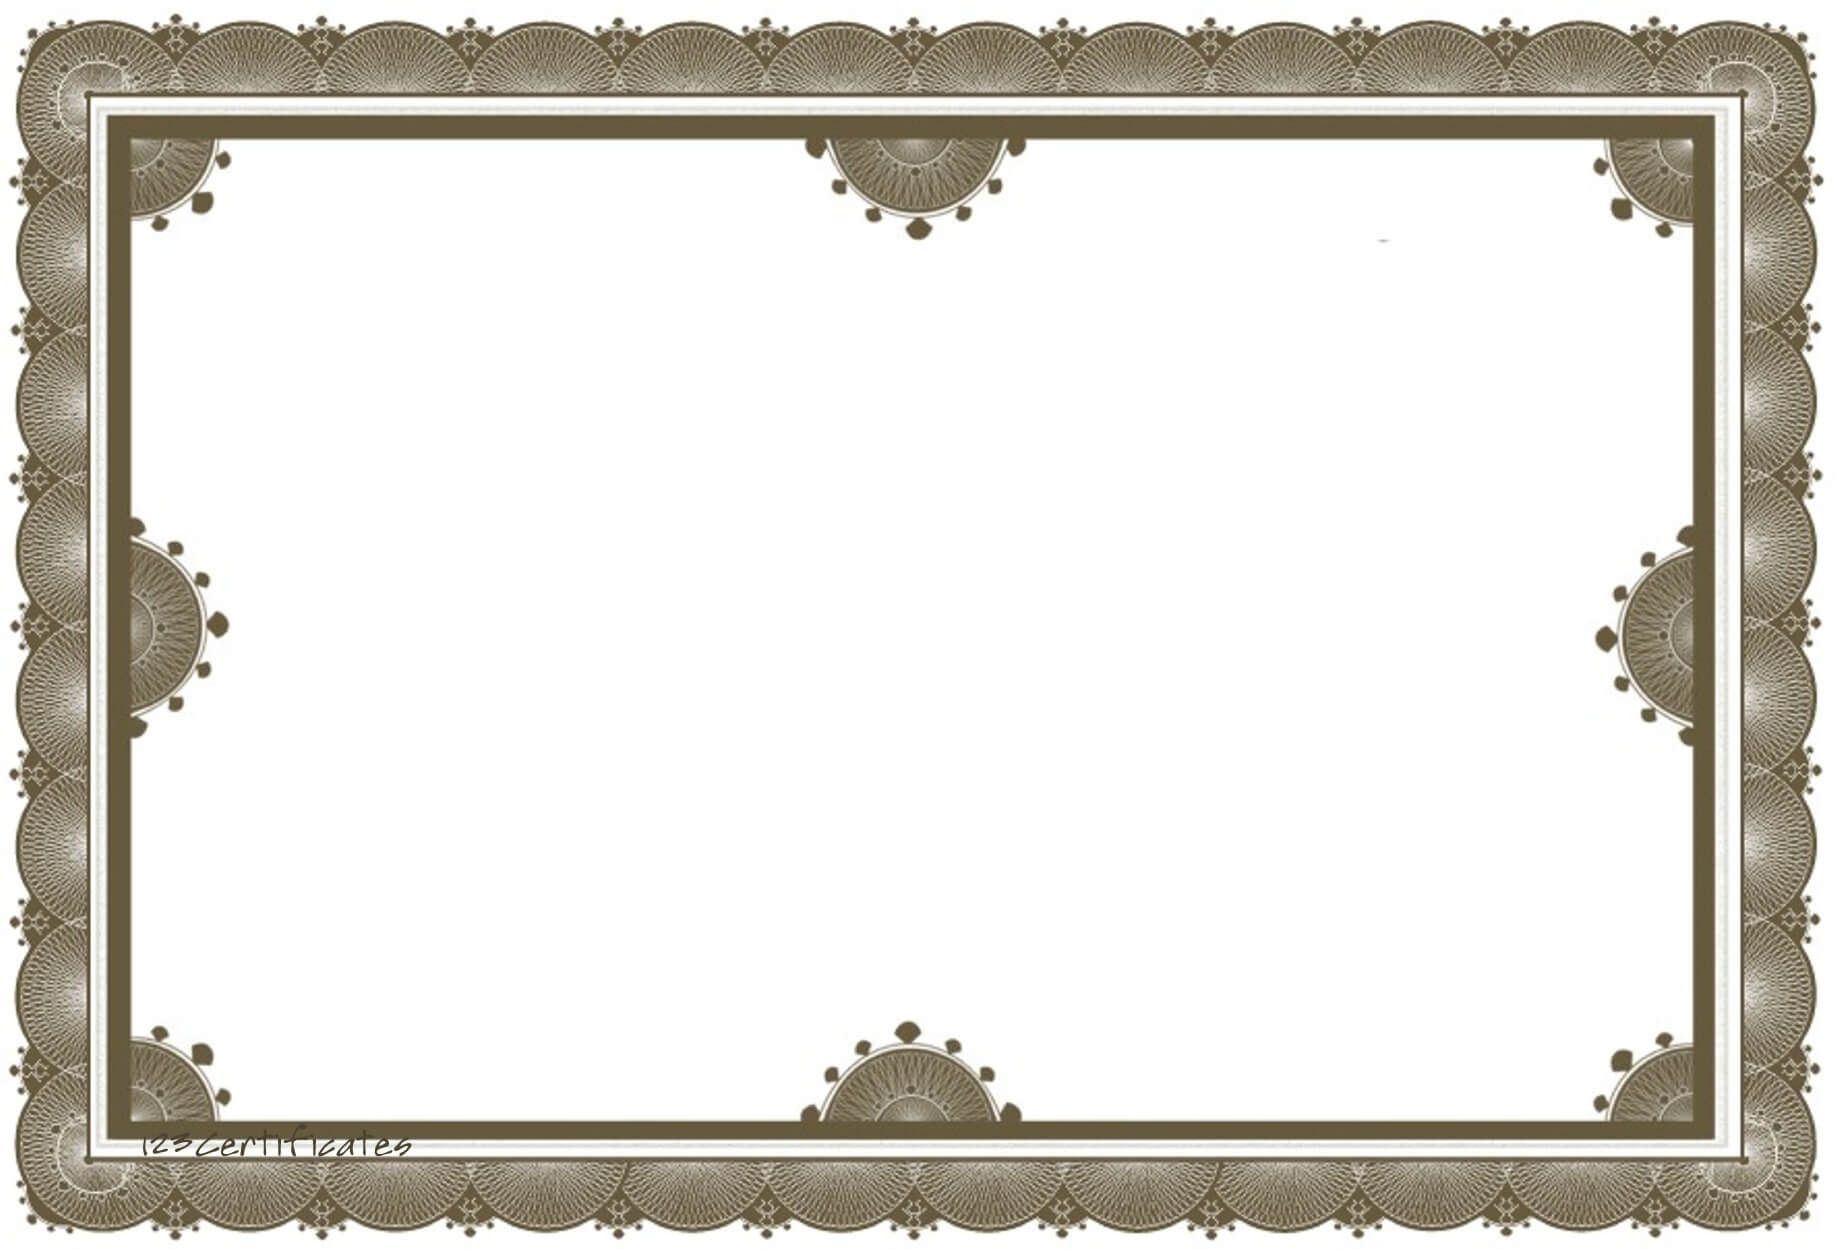 Free Certificate Borders To Download Pertaining To Landscape Certificate Templates